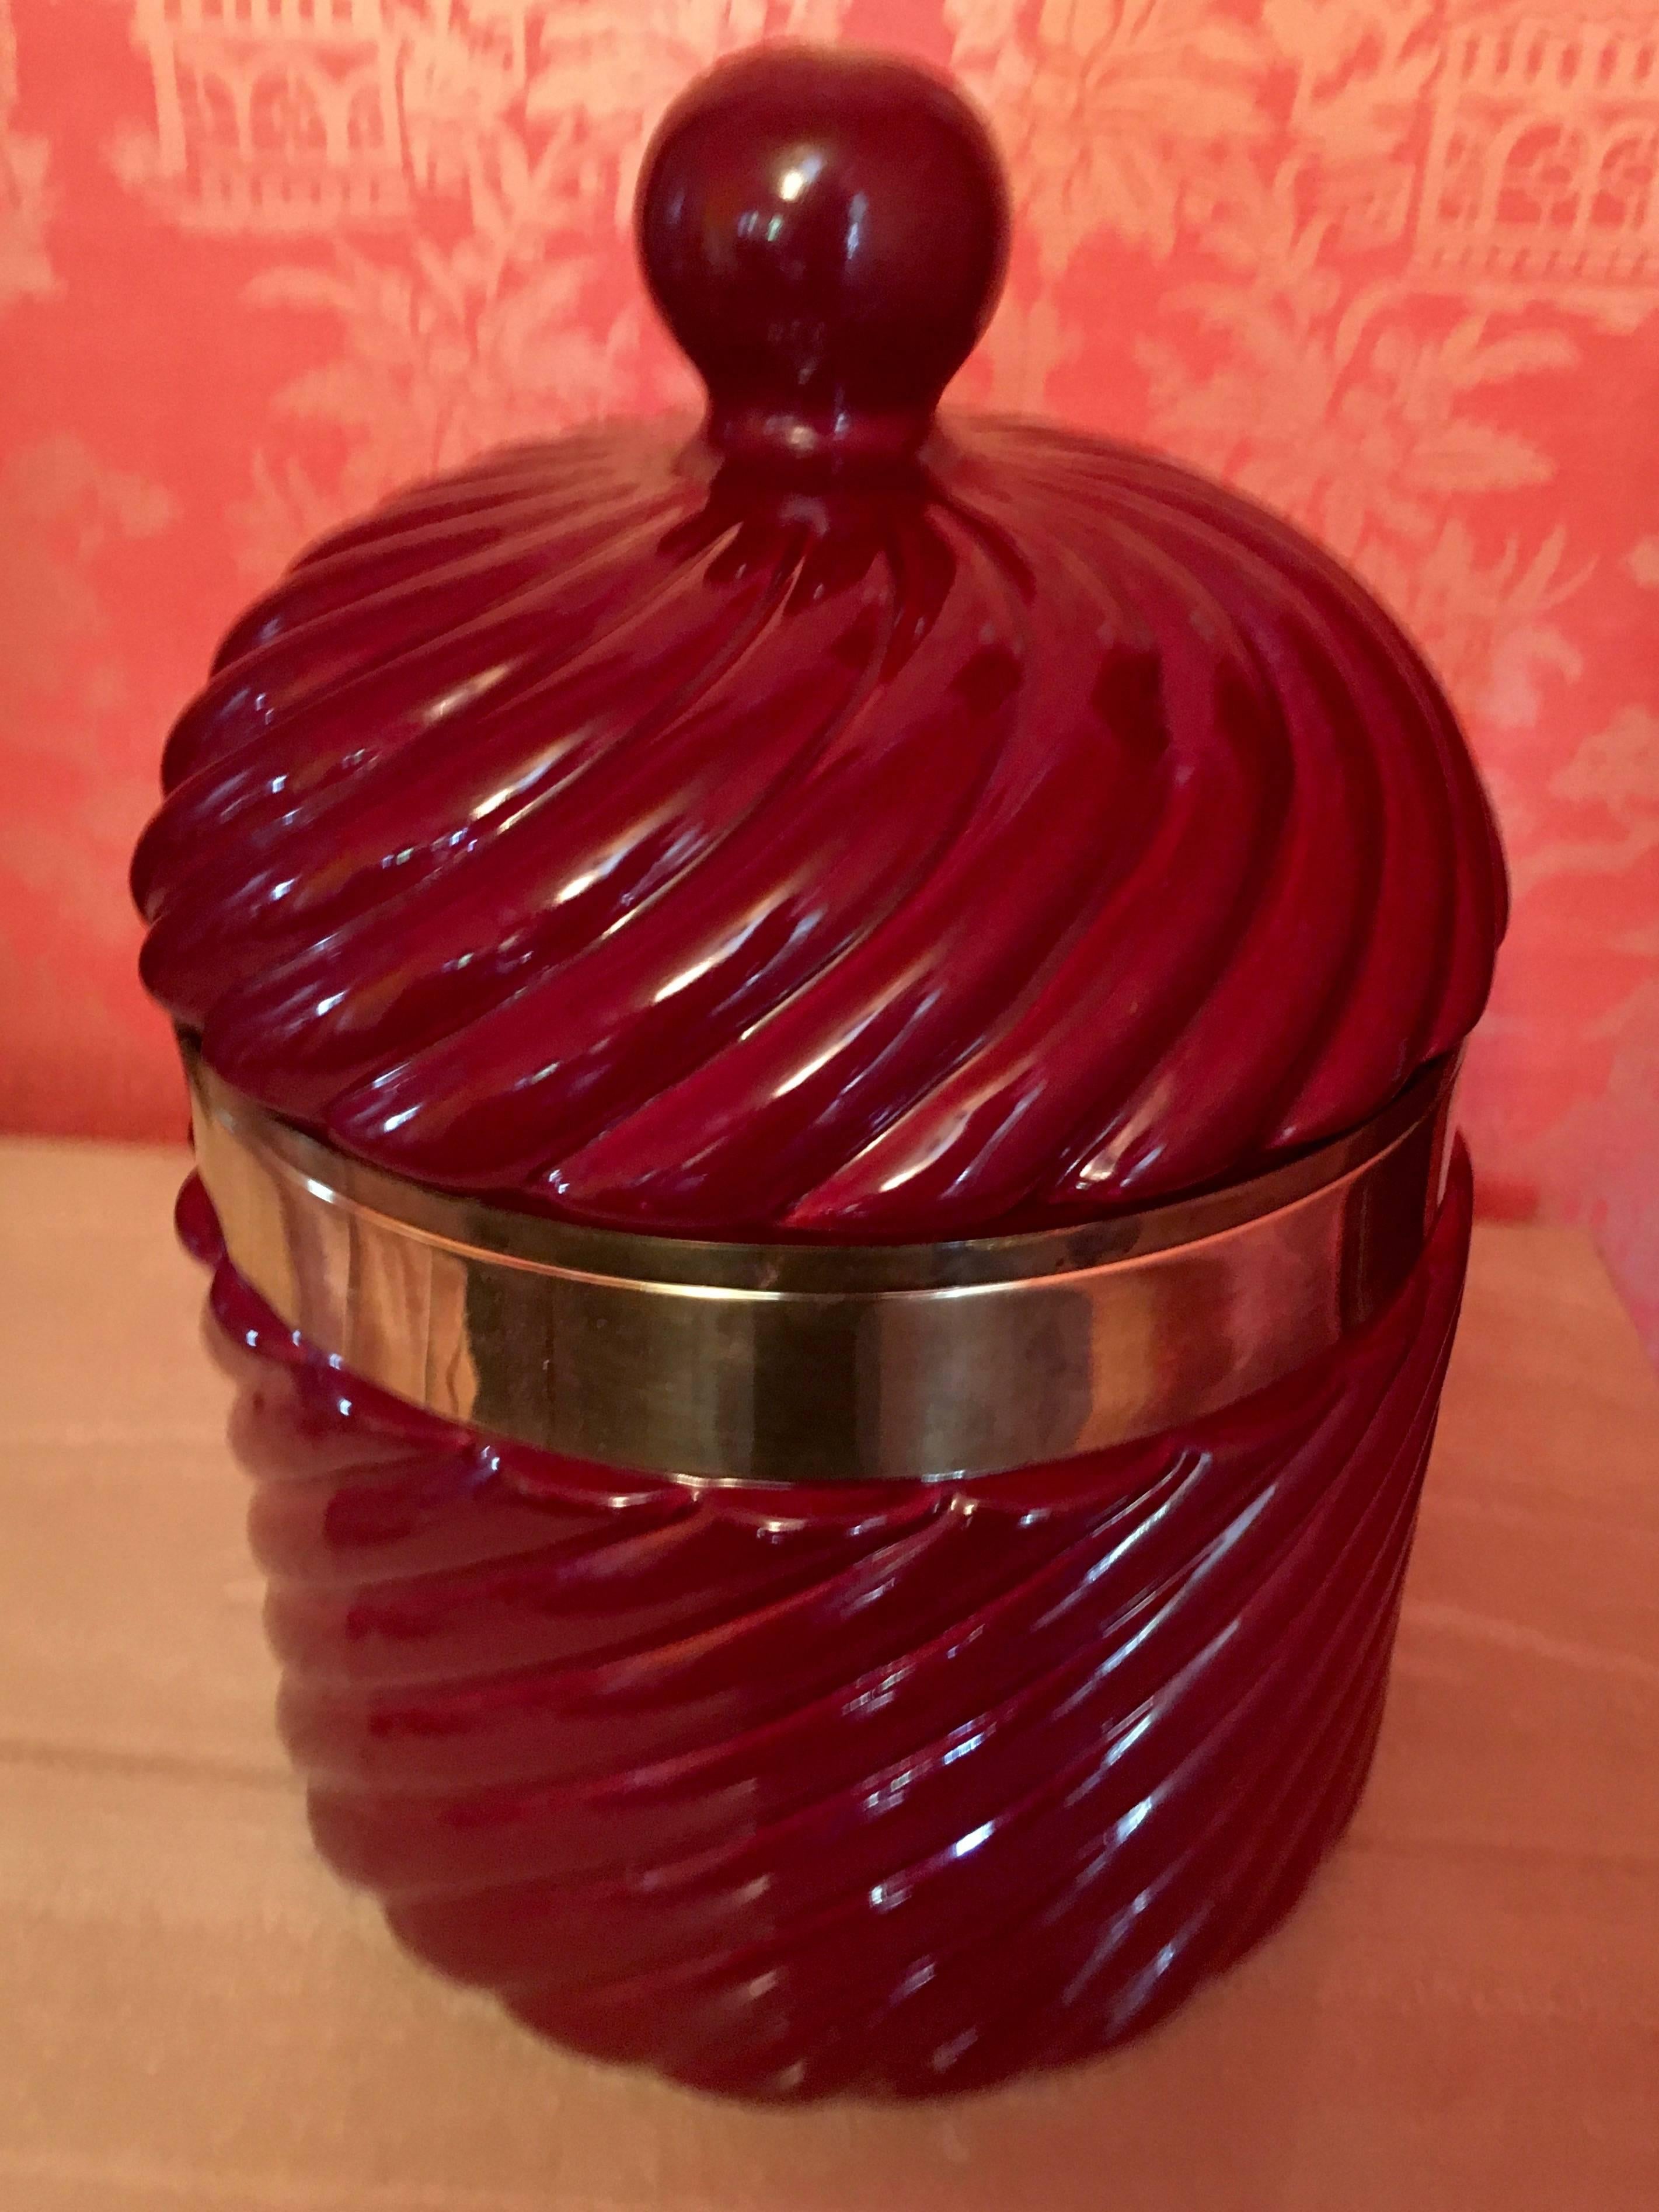 Italian ceramic ice bucket by Italian Designer Tommaso Barbi in oxblood color. Ice bucket is large and of substantial weight. Original plastic liner is in excellent condition. The size of this piece gives great presence, as well as makes a statement